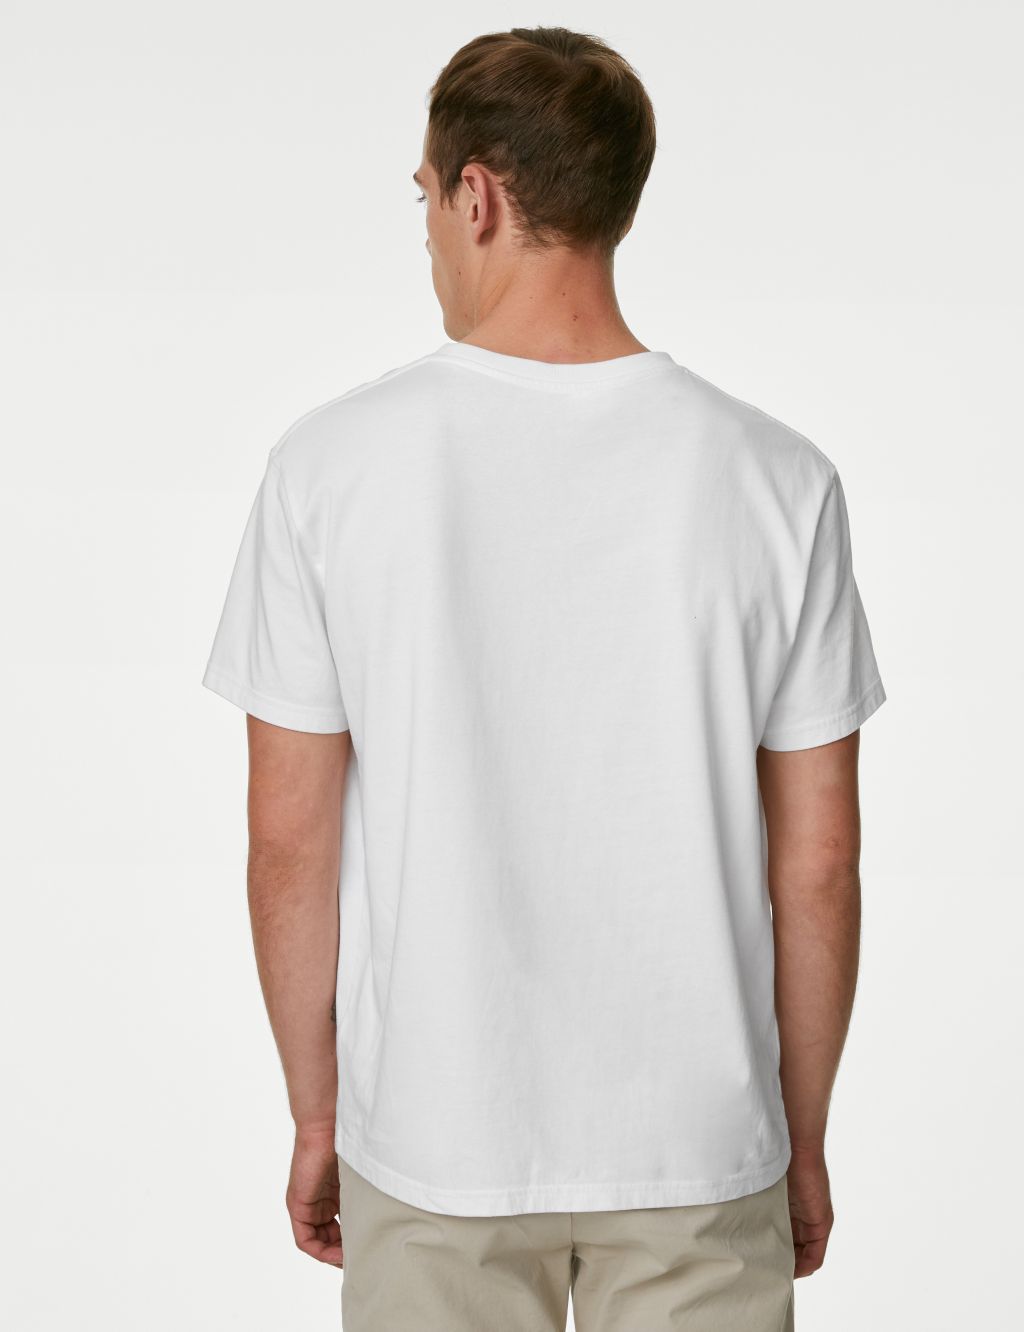 Pure Cotton Heavy Weight T-Shirt image 4